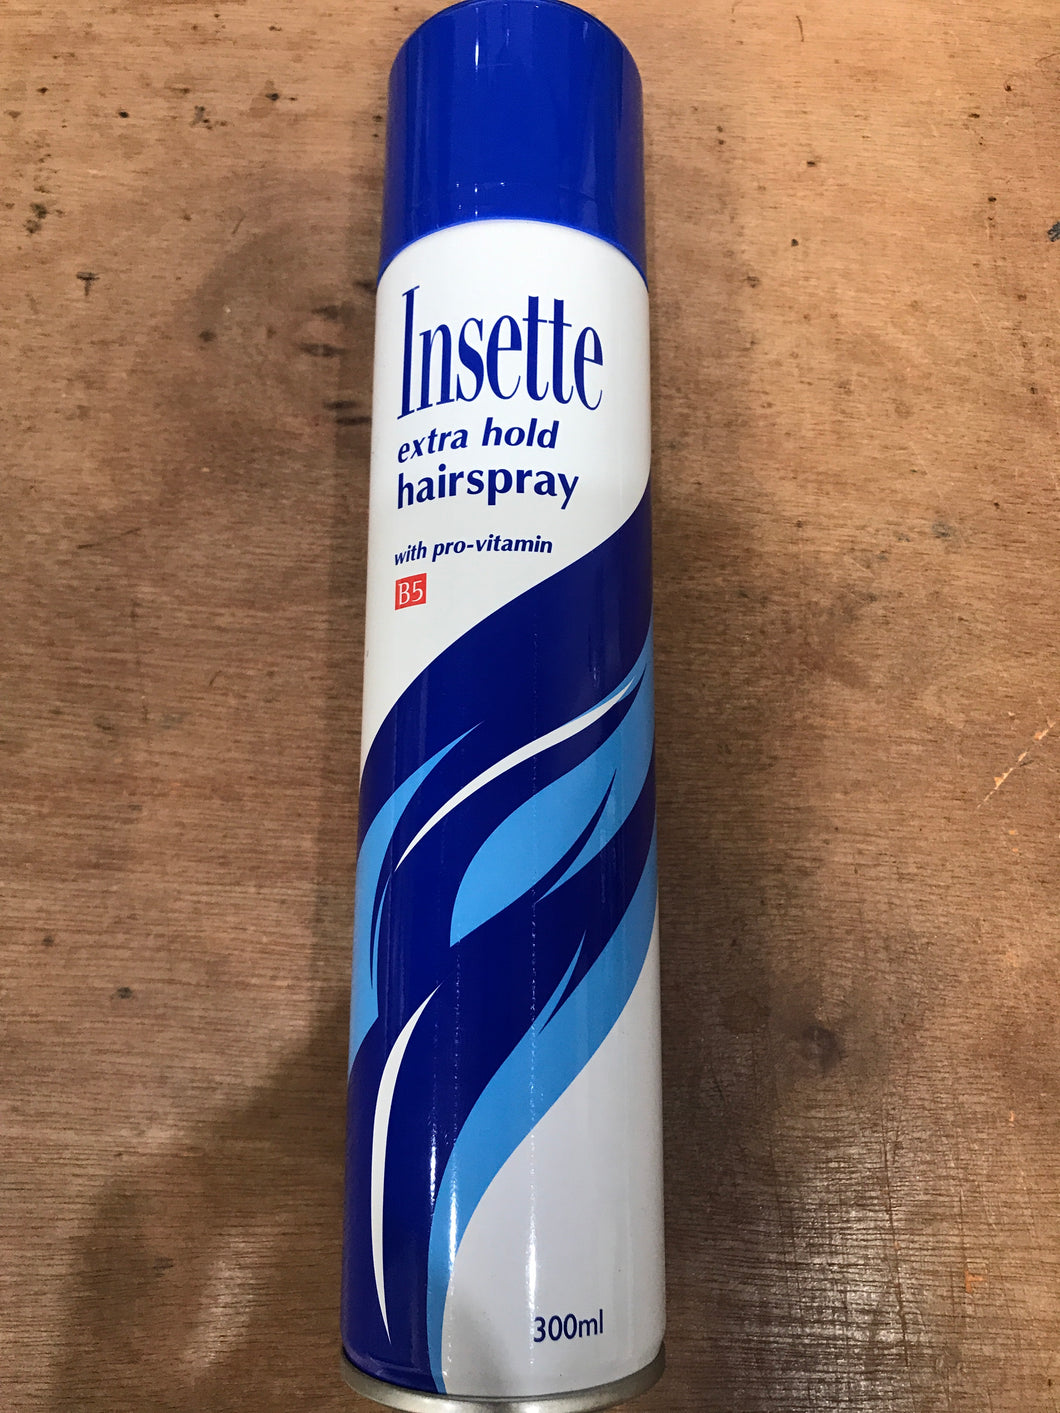 Insette Extra Hold Hairspray 300ml